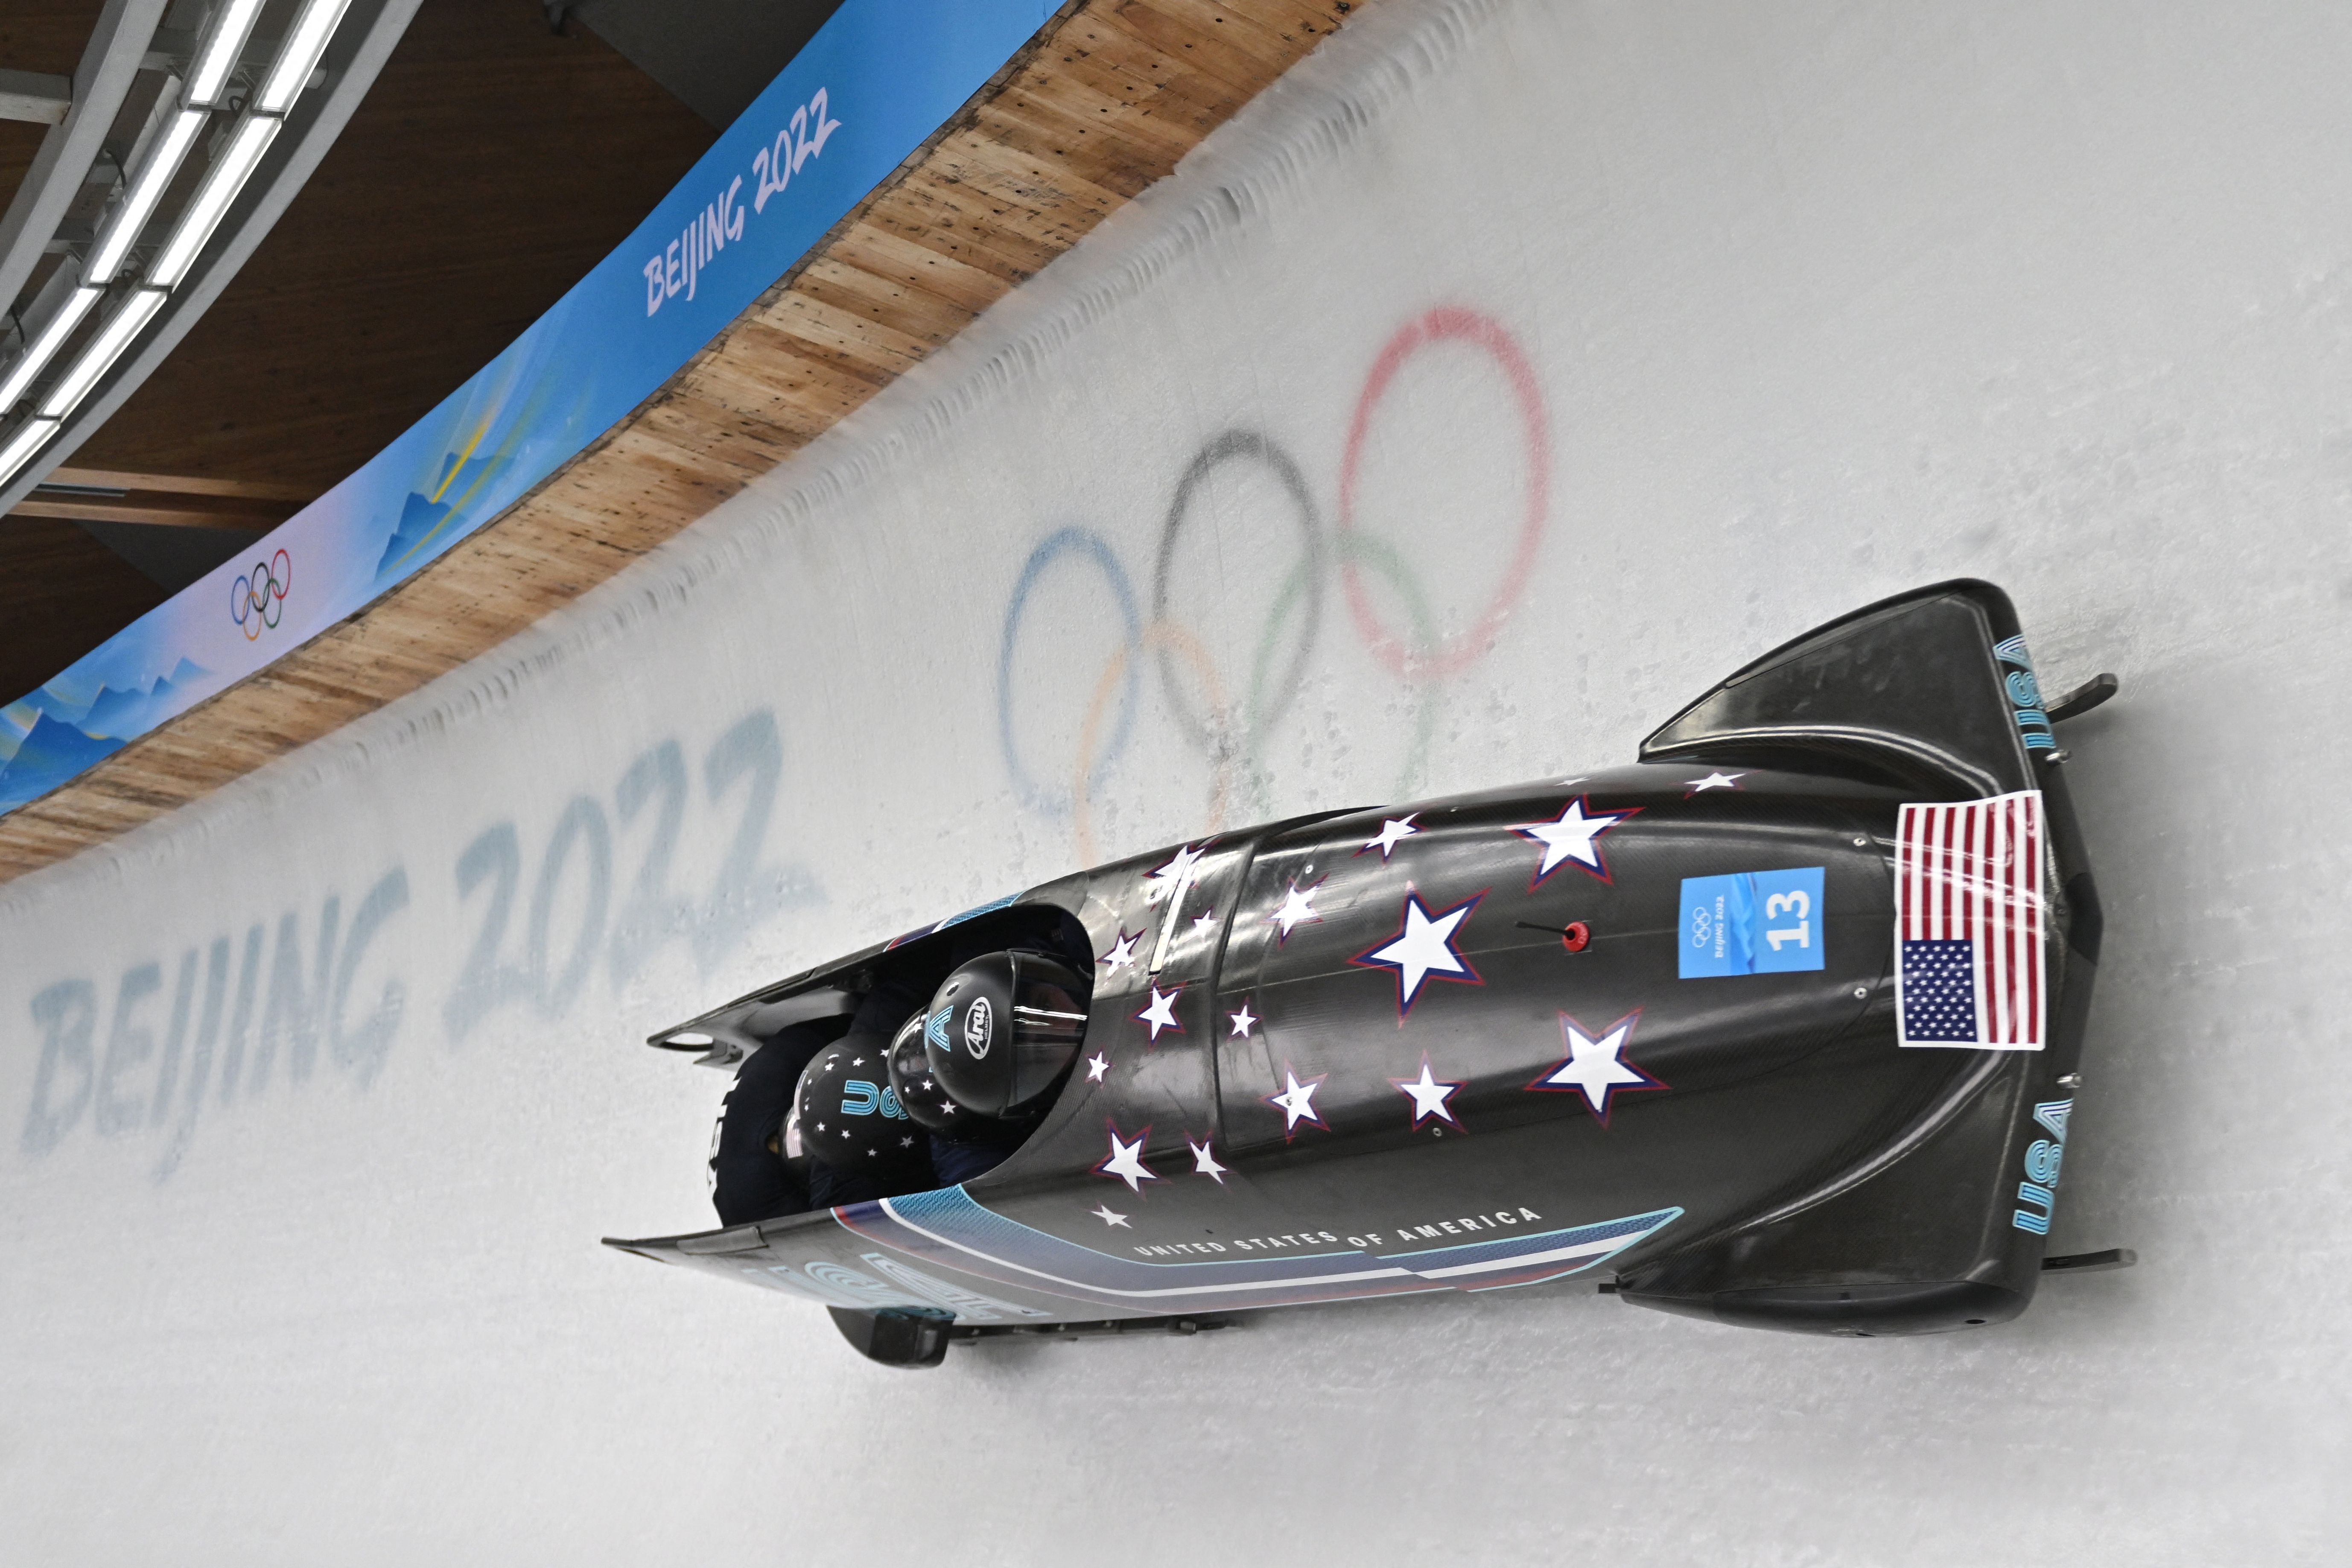 American Frank Delduca and his team take part in the 4-man bobsleigh training at the Yanqing National Sliding Centre during the Beijing 2022 Winter Olympics Feb. 18.